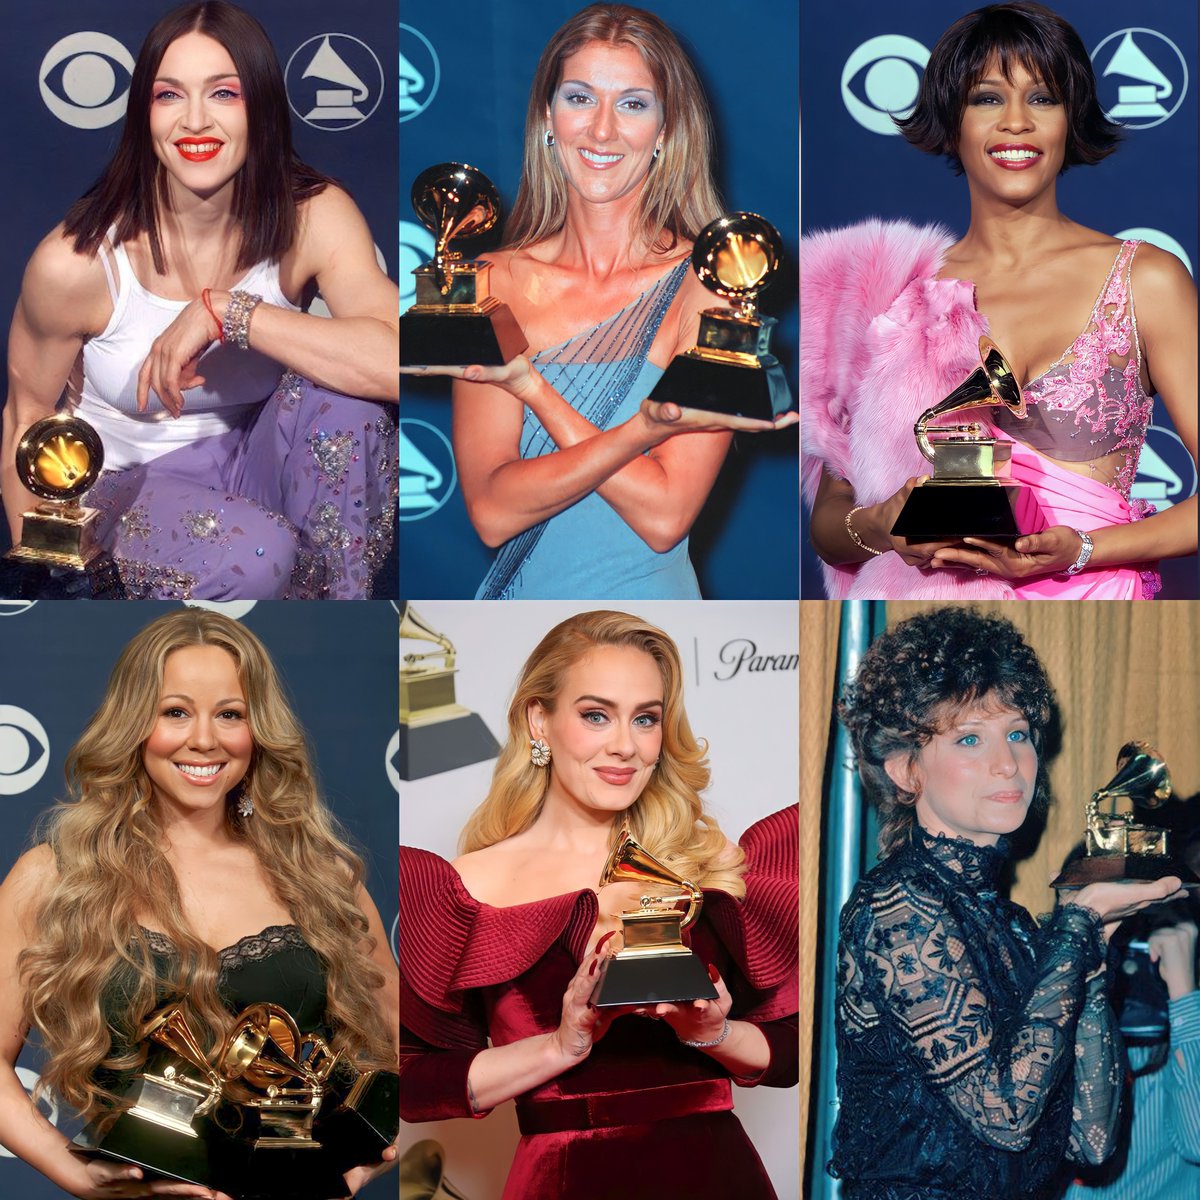 the most successful female artist of all time According to Chartmasters:
 
— Madonna 
— Celine Dion 
— Whitney Houston 
— Mariah Carey 
— Adele 
— Barbra Streisand 

Adele is the most successful act of the 21st century all time.